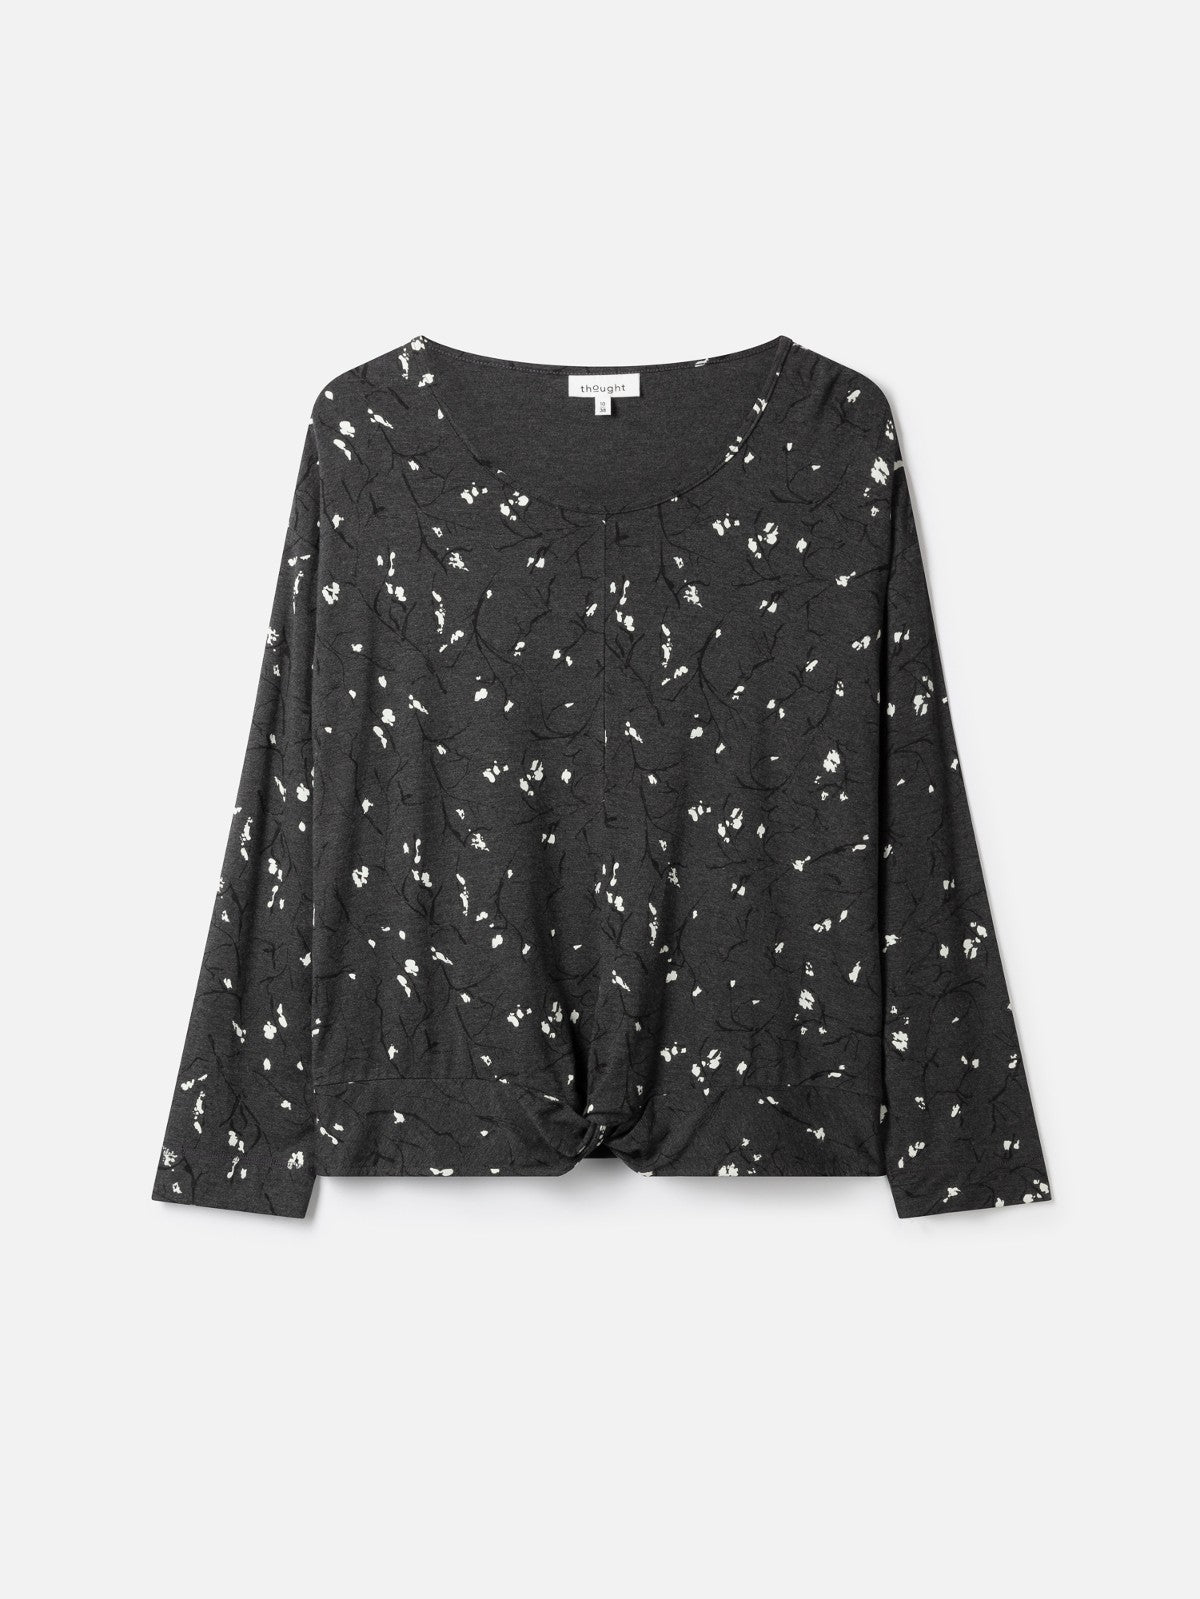 Eira Bamboo Floral Top - Charcoal Grey